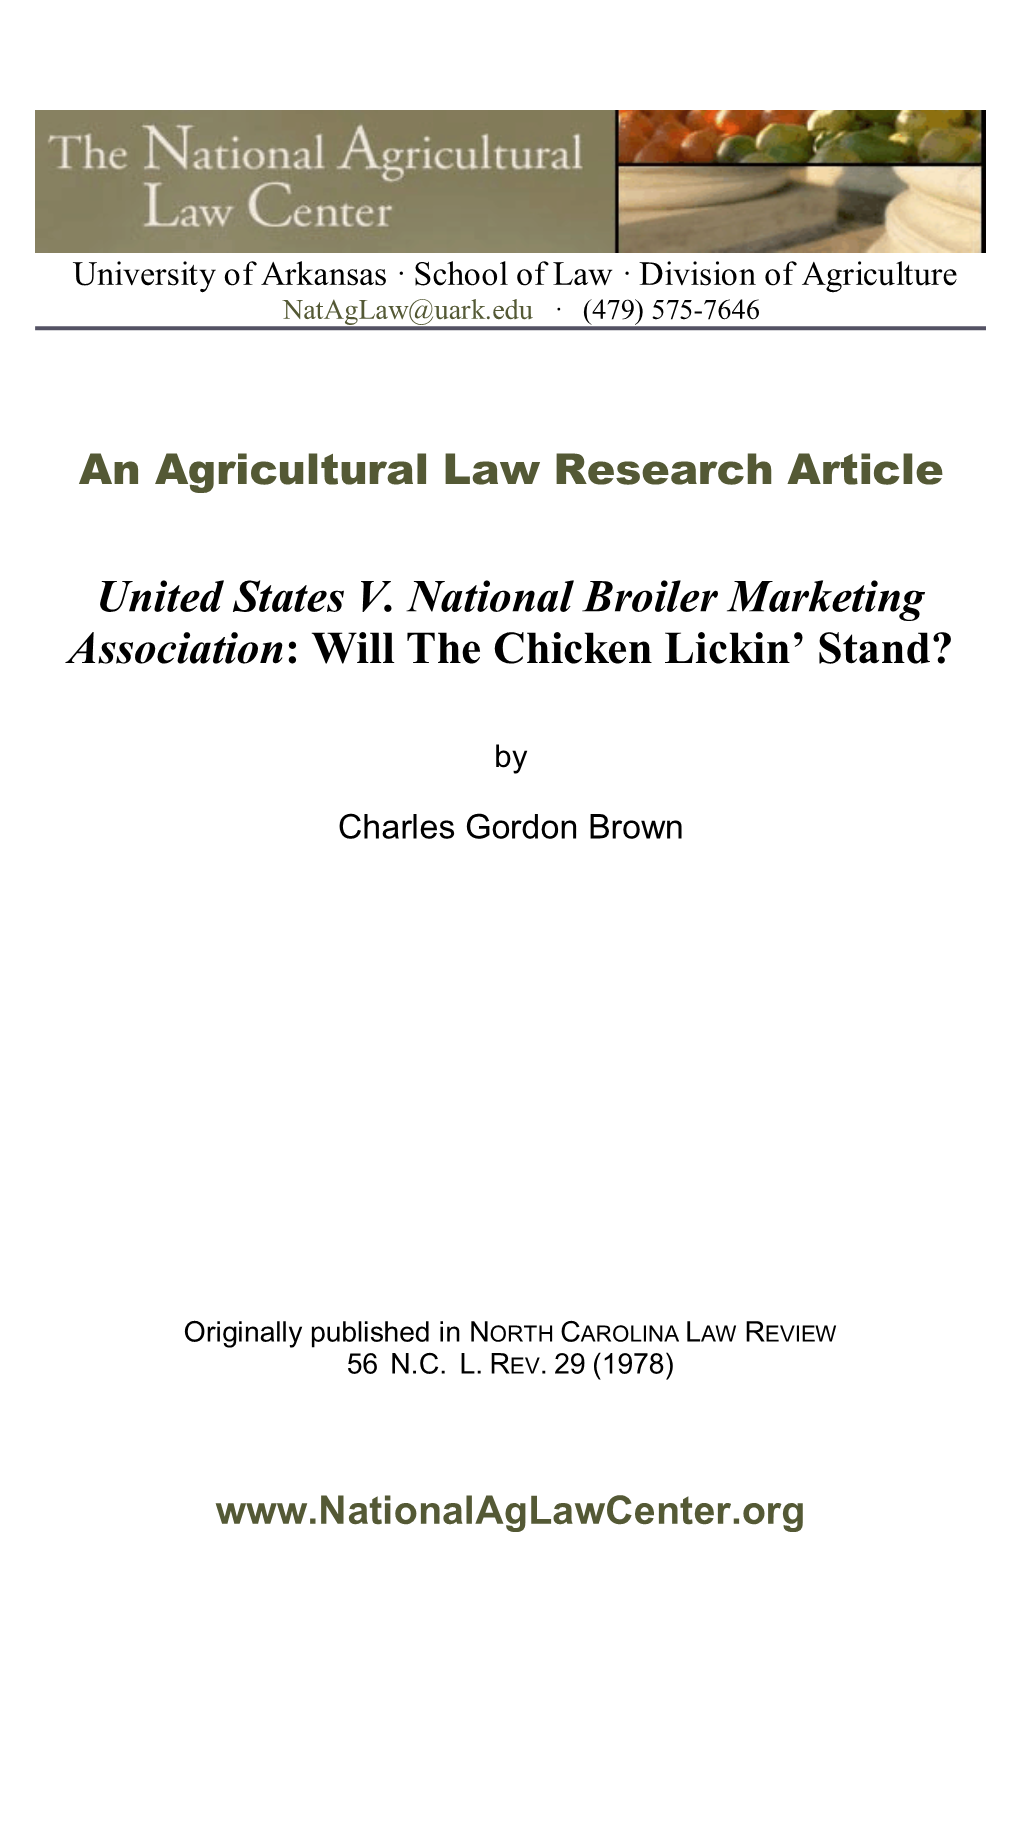 United States V. National Broiler Marketing Association: Will the Chicken Lickin’ Stand?